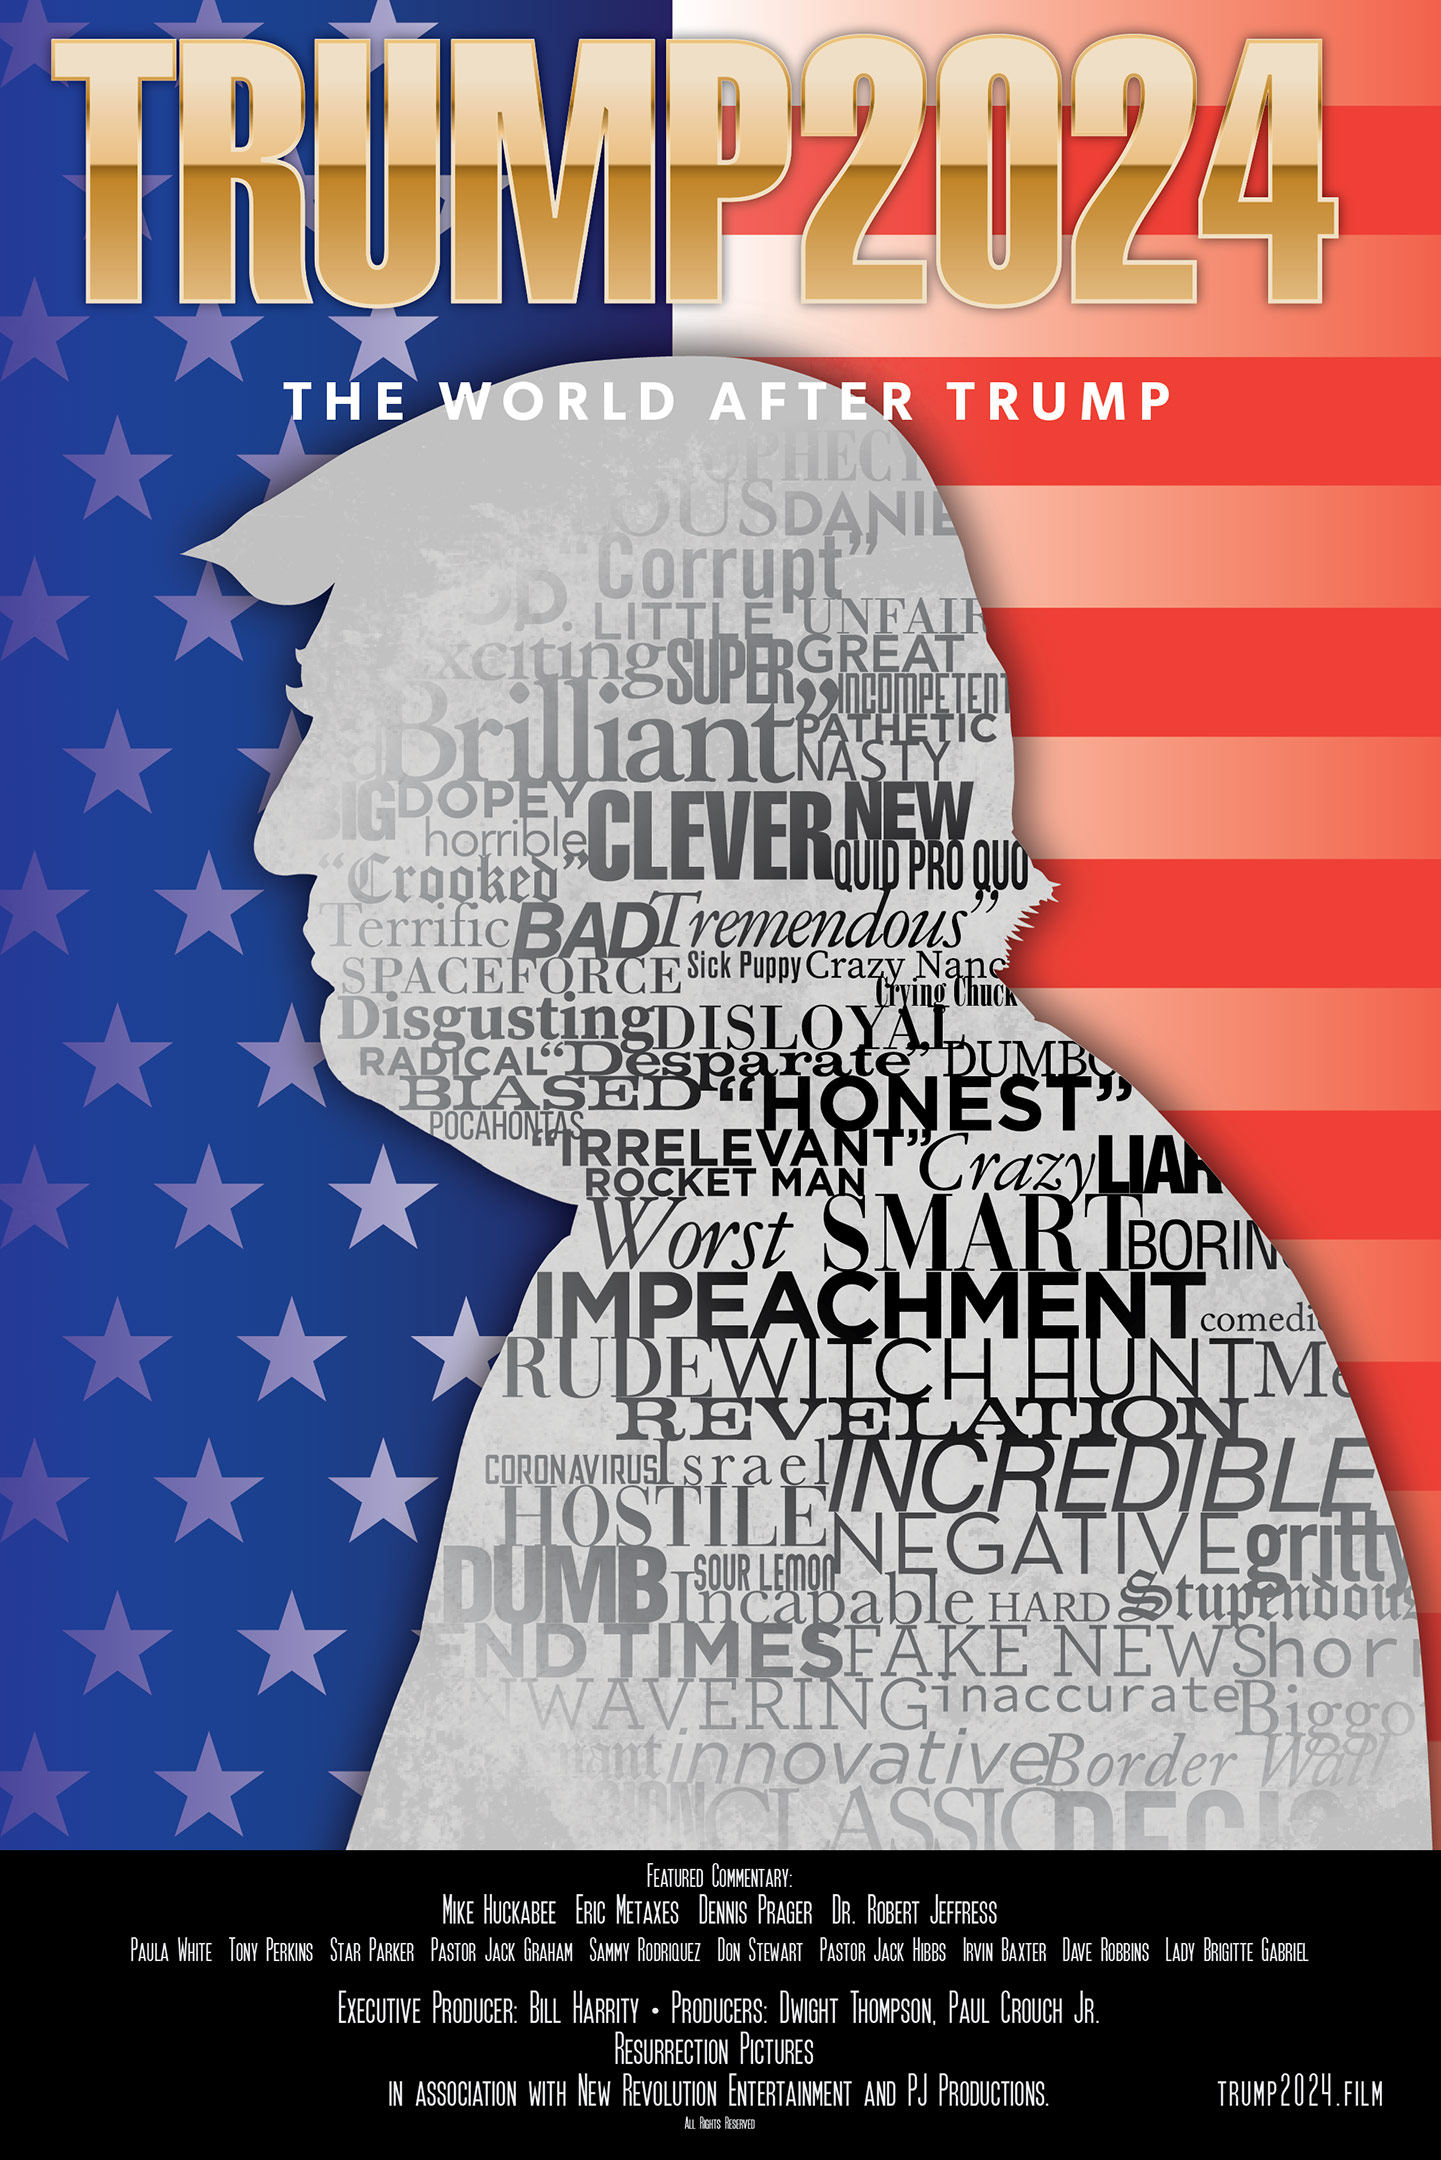 Trump 2024 Official Poster